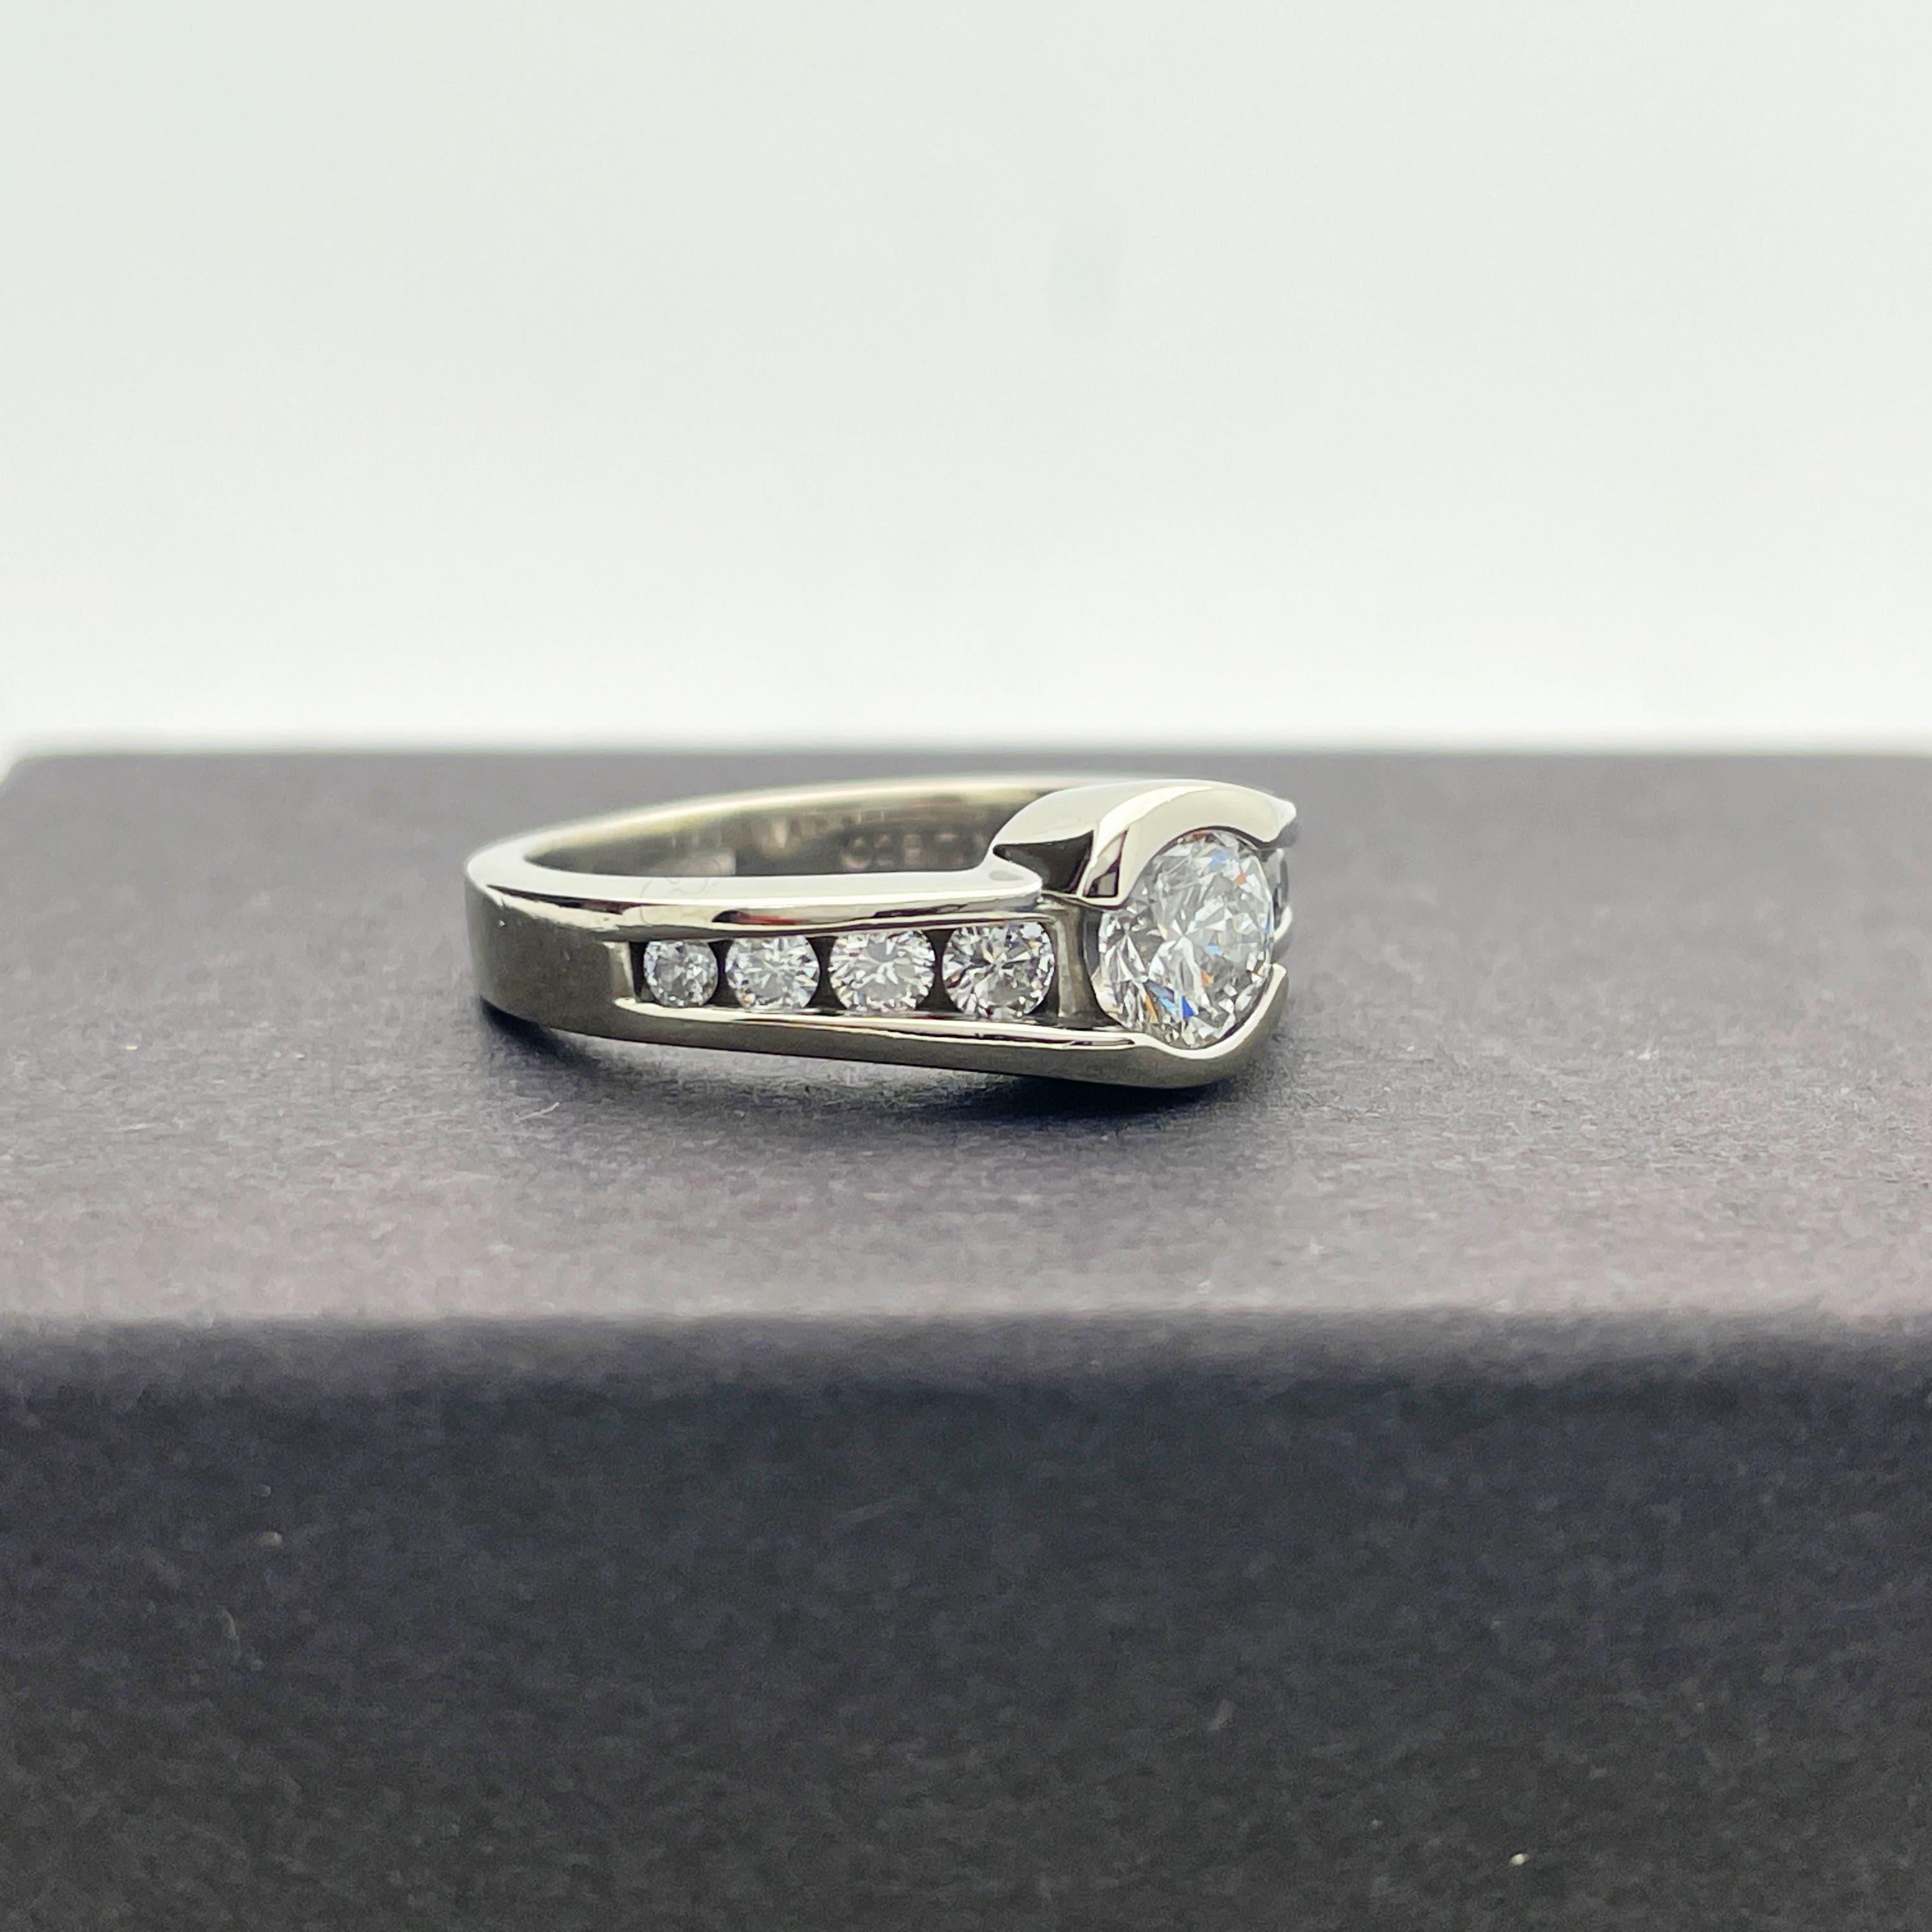 Here is a beautiful 14k White Gold Diamond Engagement Ring.

This ring features a center 0.57ct round brilliant cut diamond measuring 5.30mm x 3.35mm. I-1 clarity grade, G-H colour with good polish, symmetry and proportions. Surrounded by 8x 0.03ct